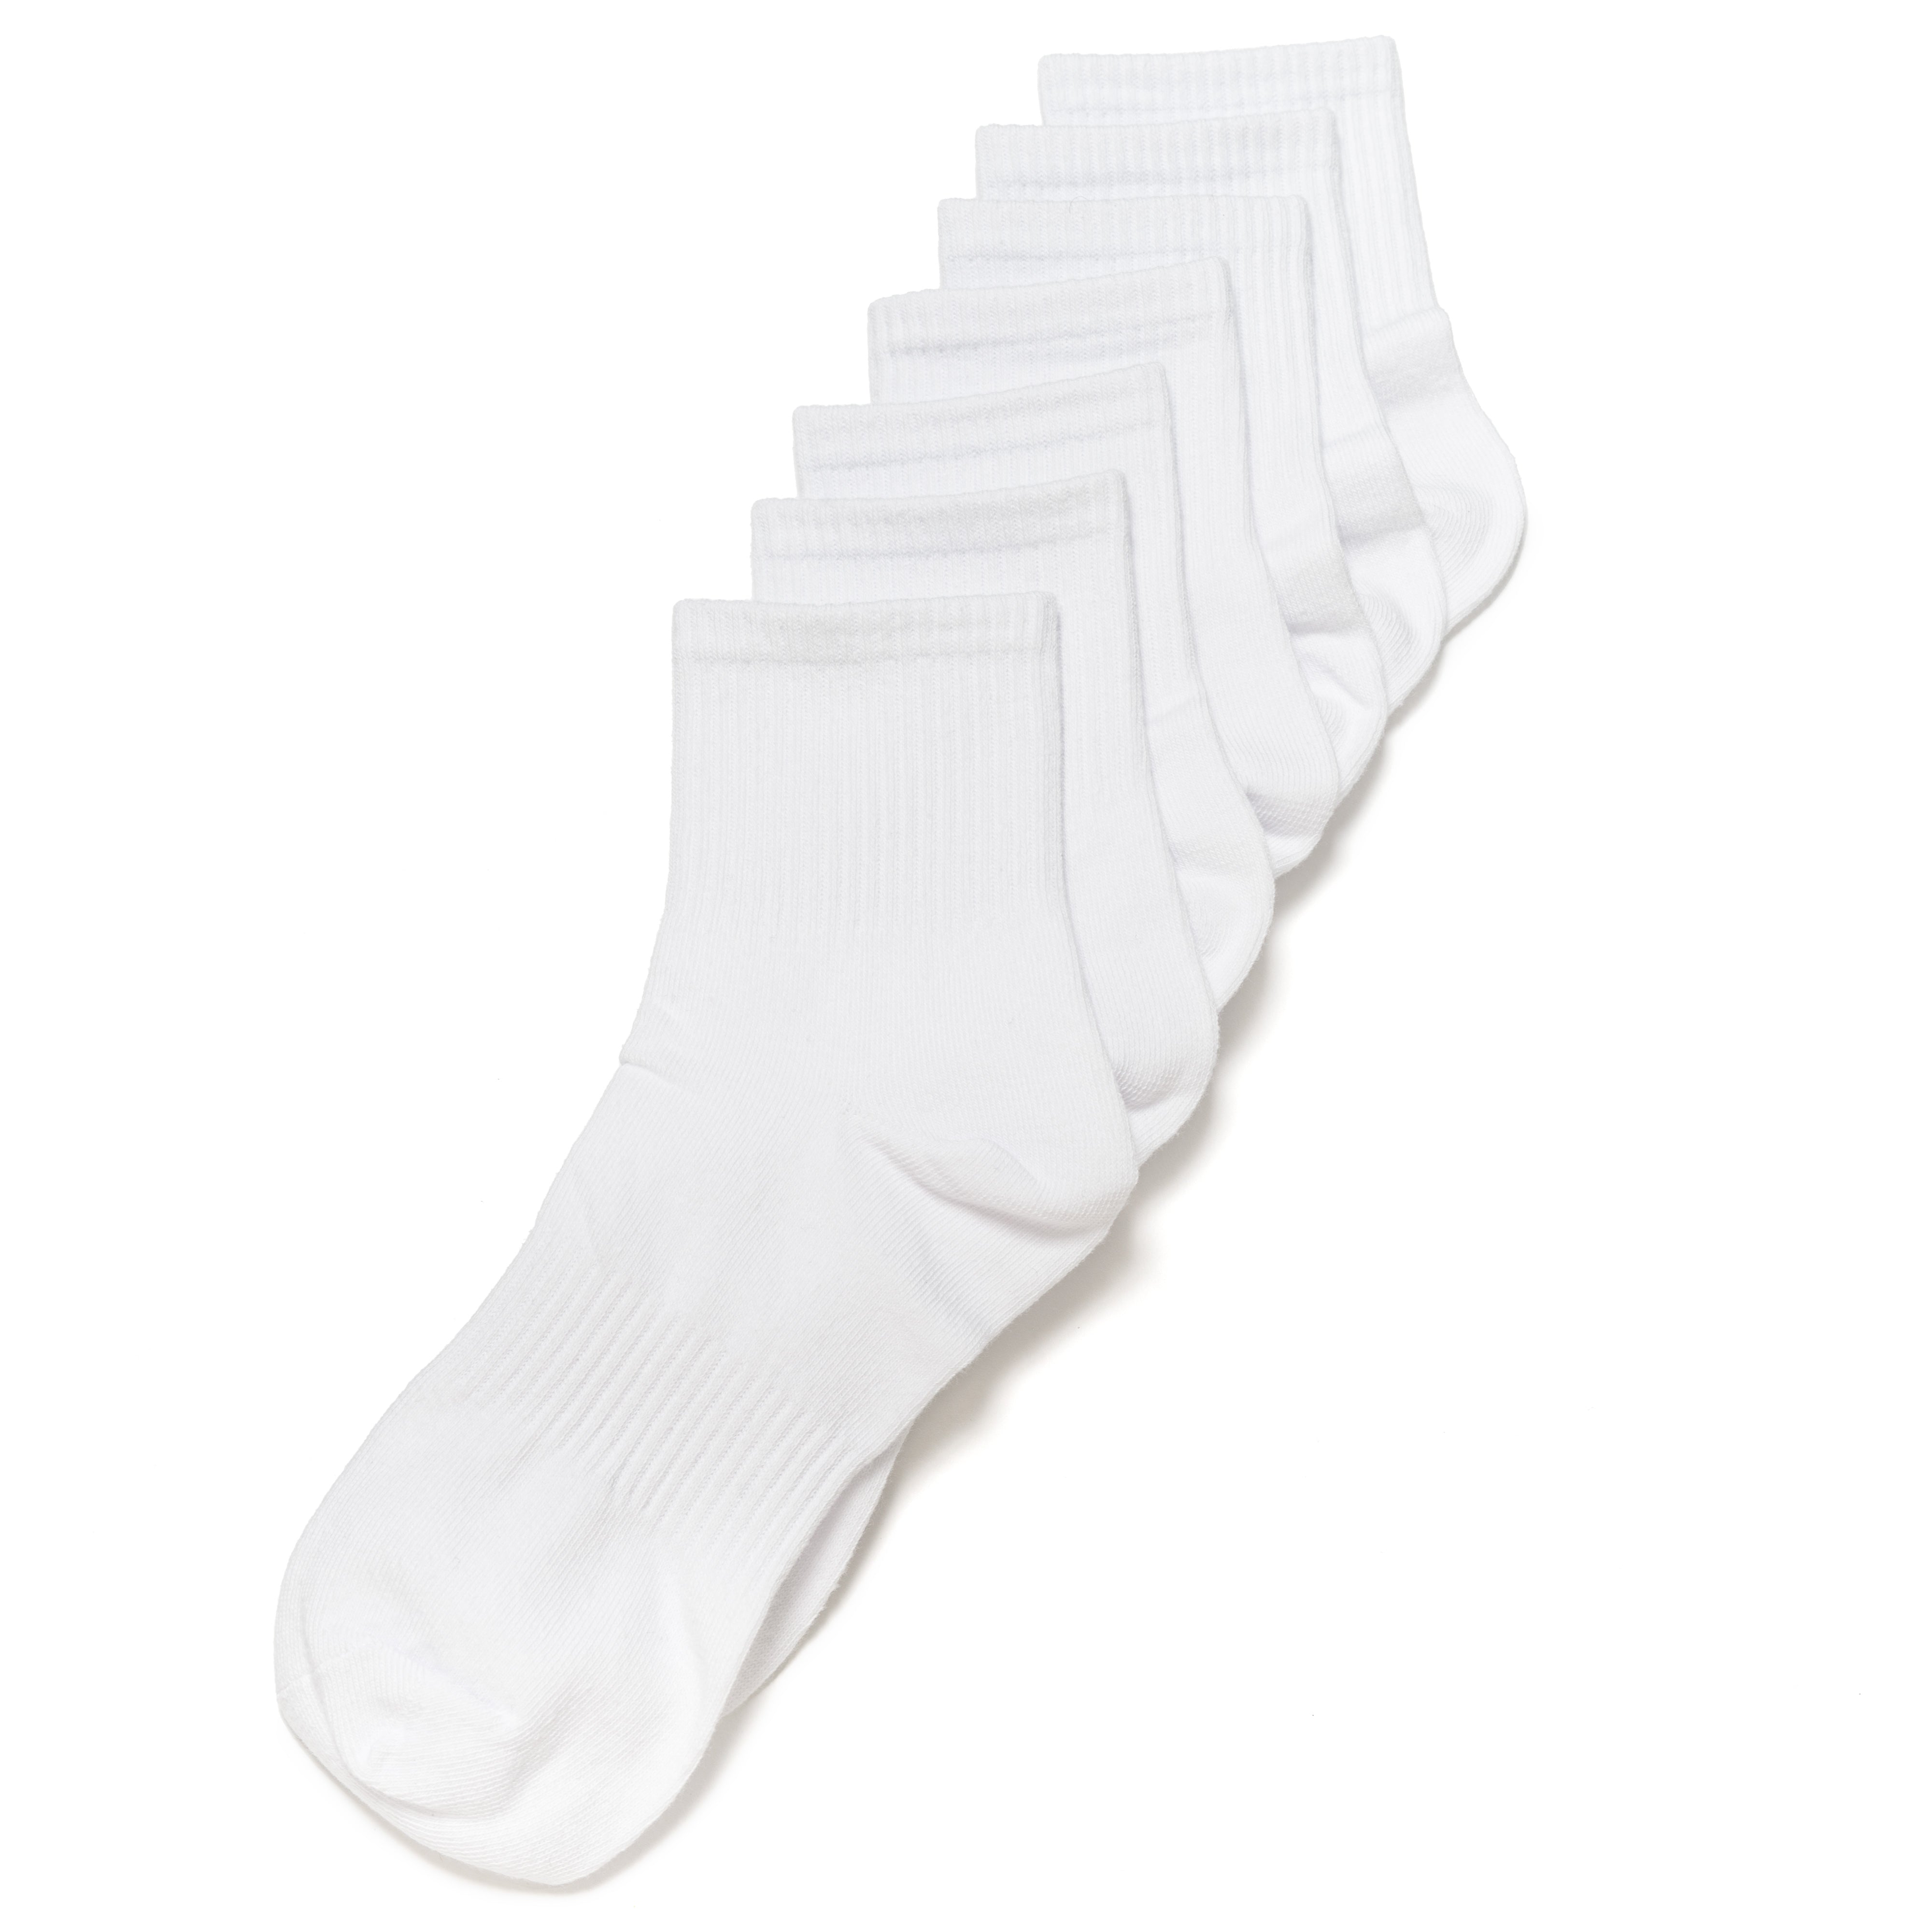 31 Pairs of High Cotton Mid Ankle Women's Socks - New Socks Daily